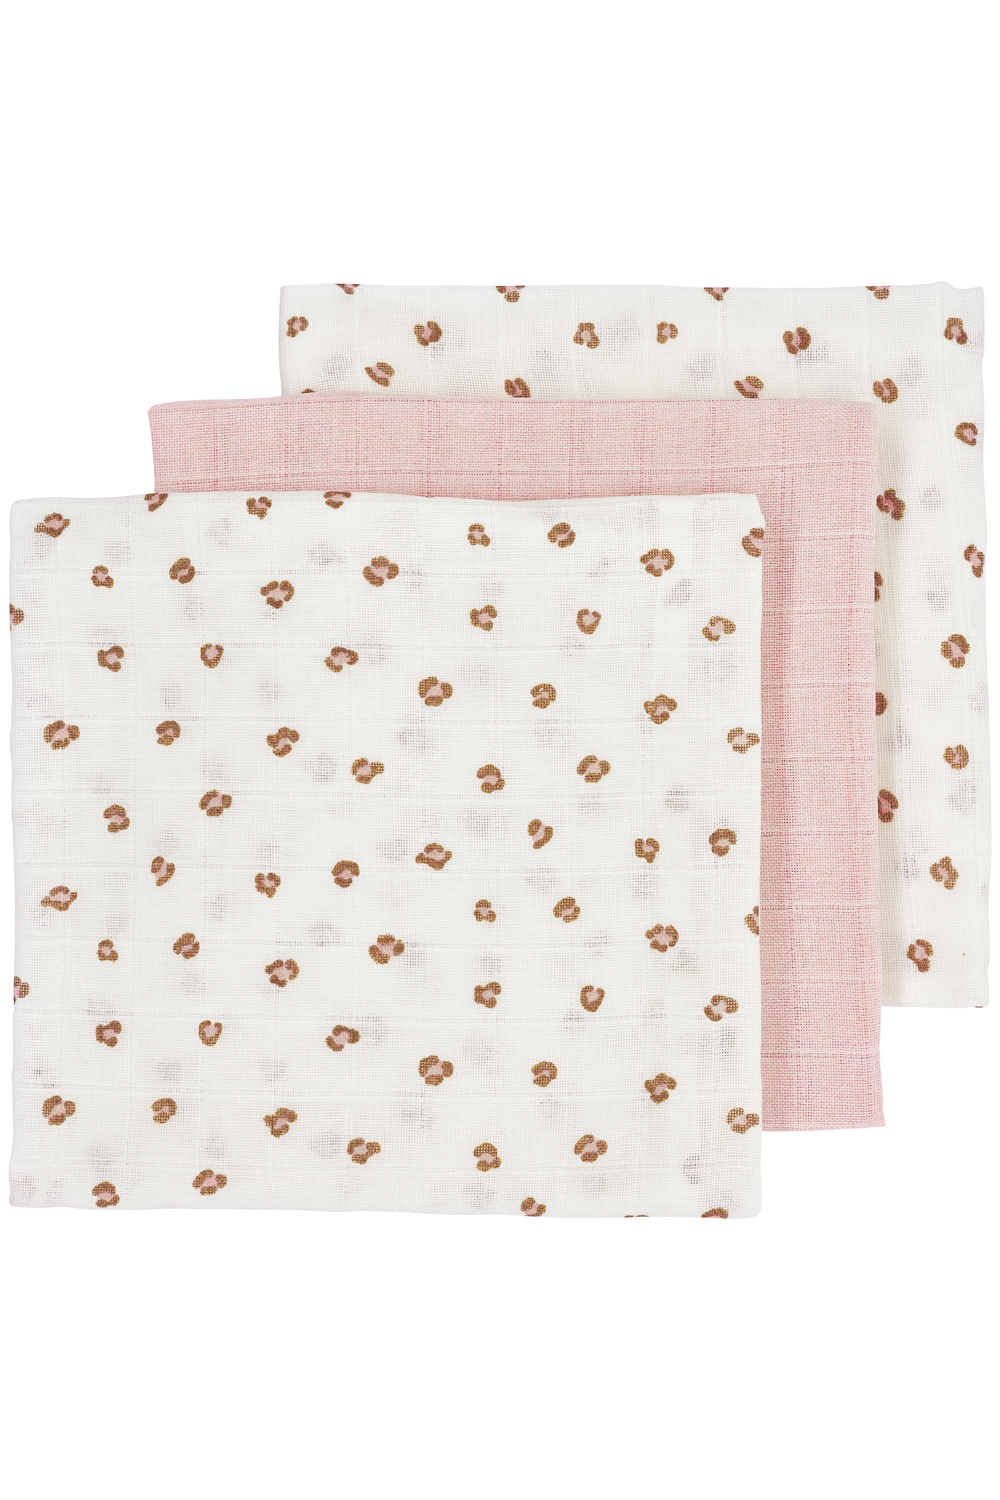 Musselin Windeln 3-pack Mini Panther - Soft Pink - 70x70cm